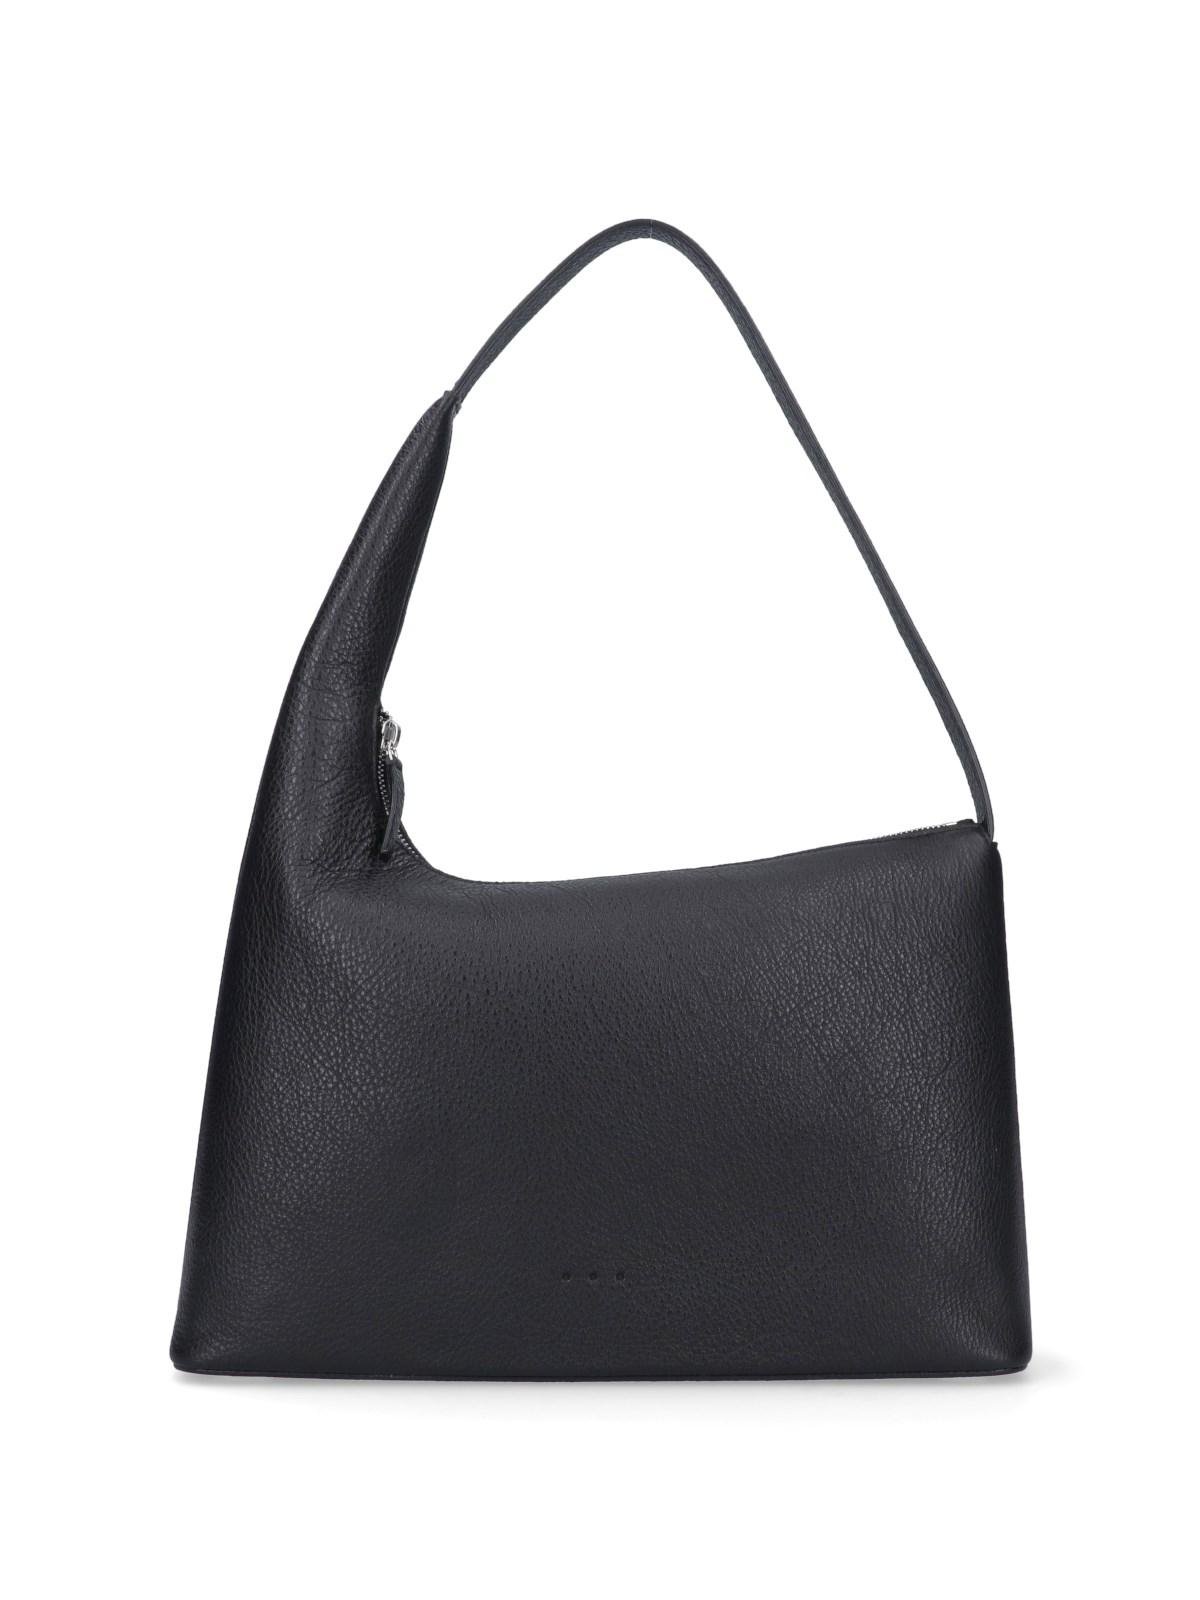 Aesther Ekme 'soft Lune' Bag in Black